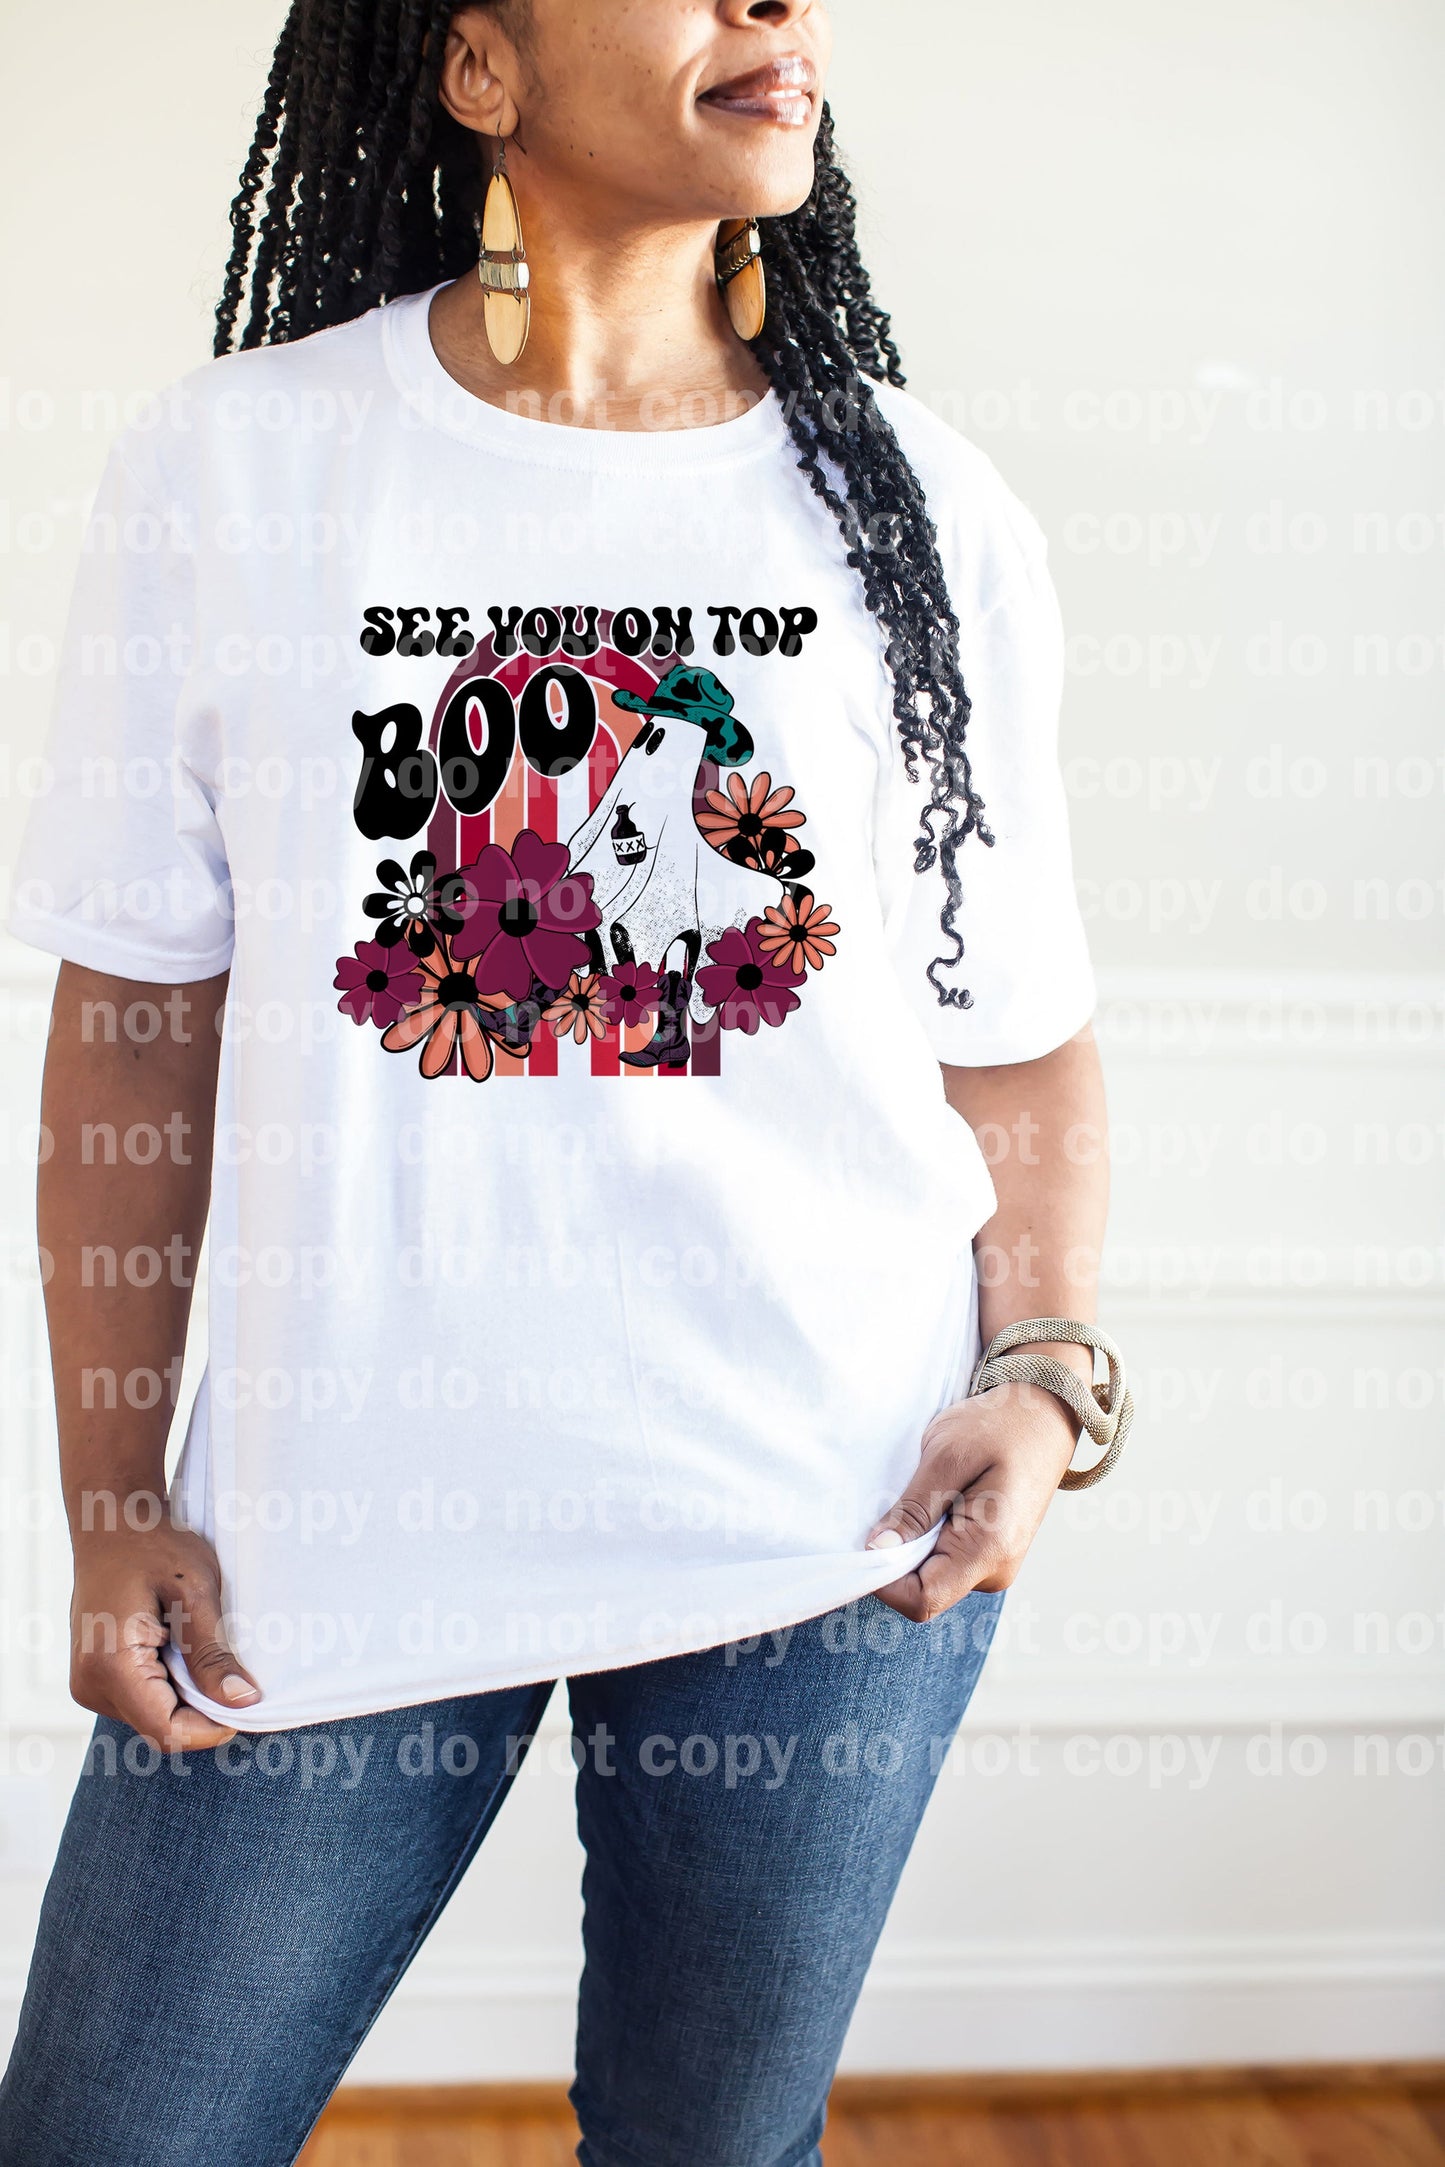 See You On Top Boo Dream Print or Sublimation Print